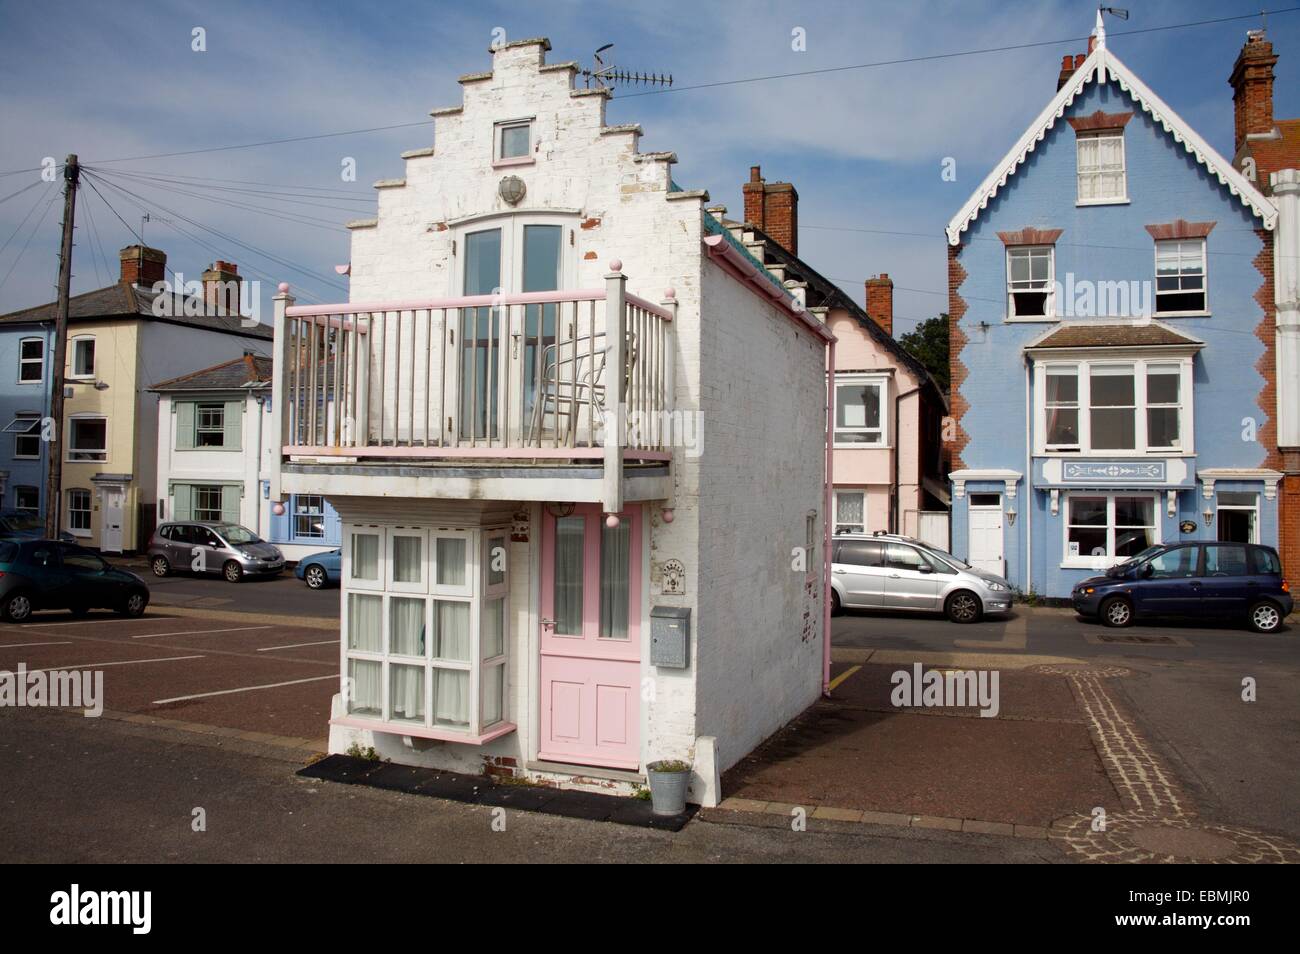 Tiny house in Aldeburgh, Suffolk Stock Photo